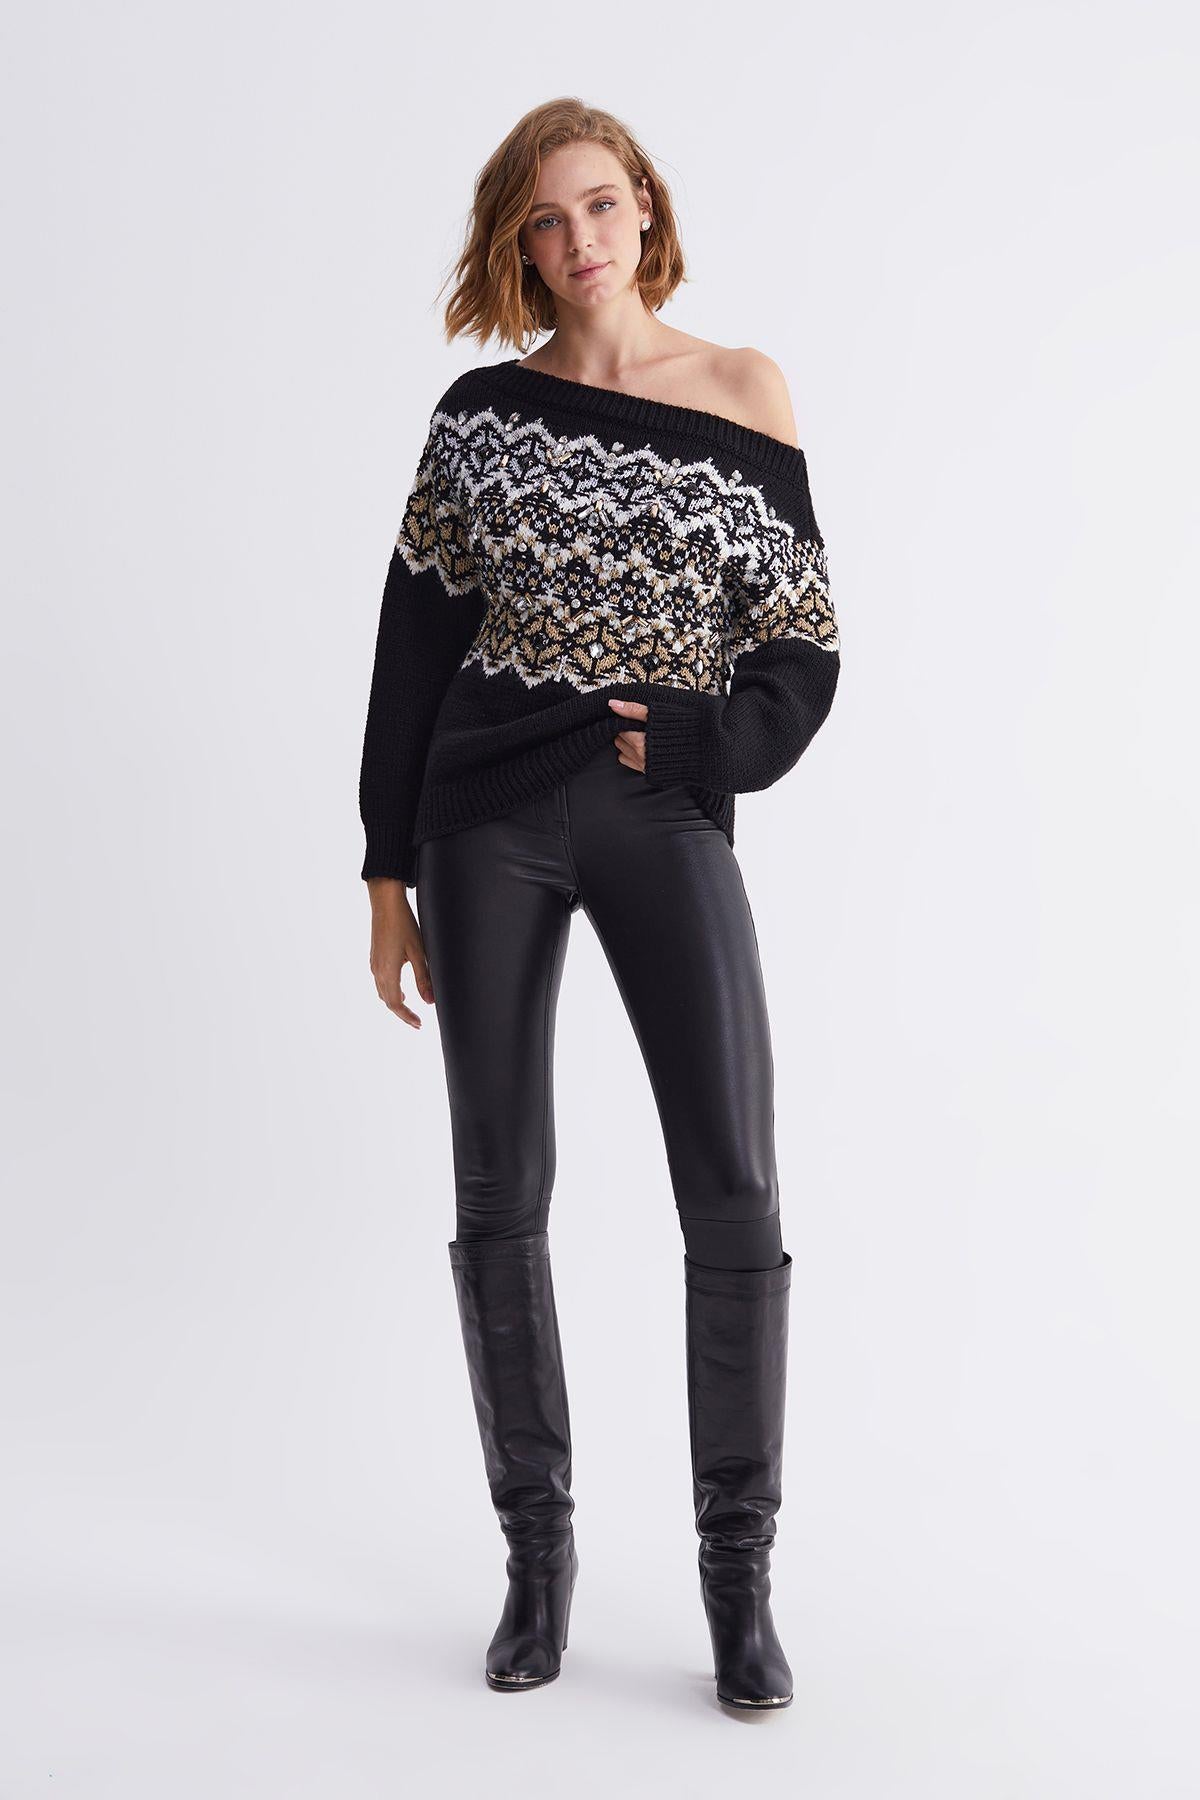 Low Shoulder Stone Embroidered Patterned Knitwear Sweater